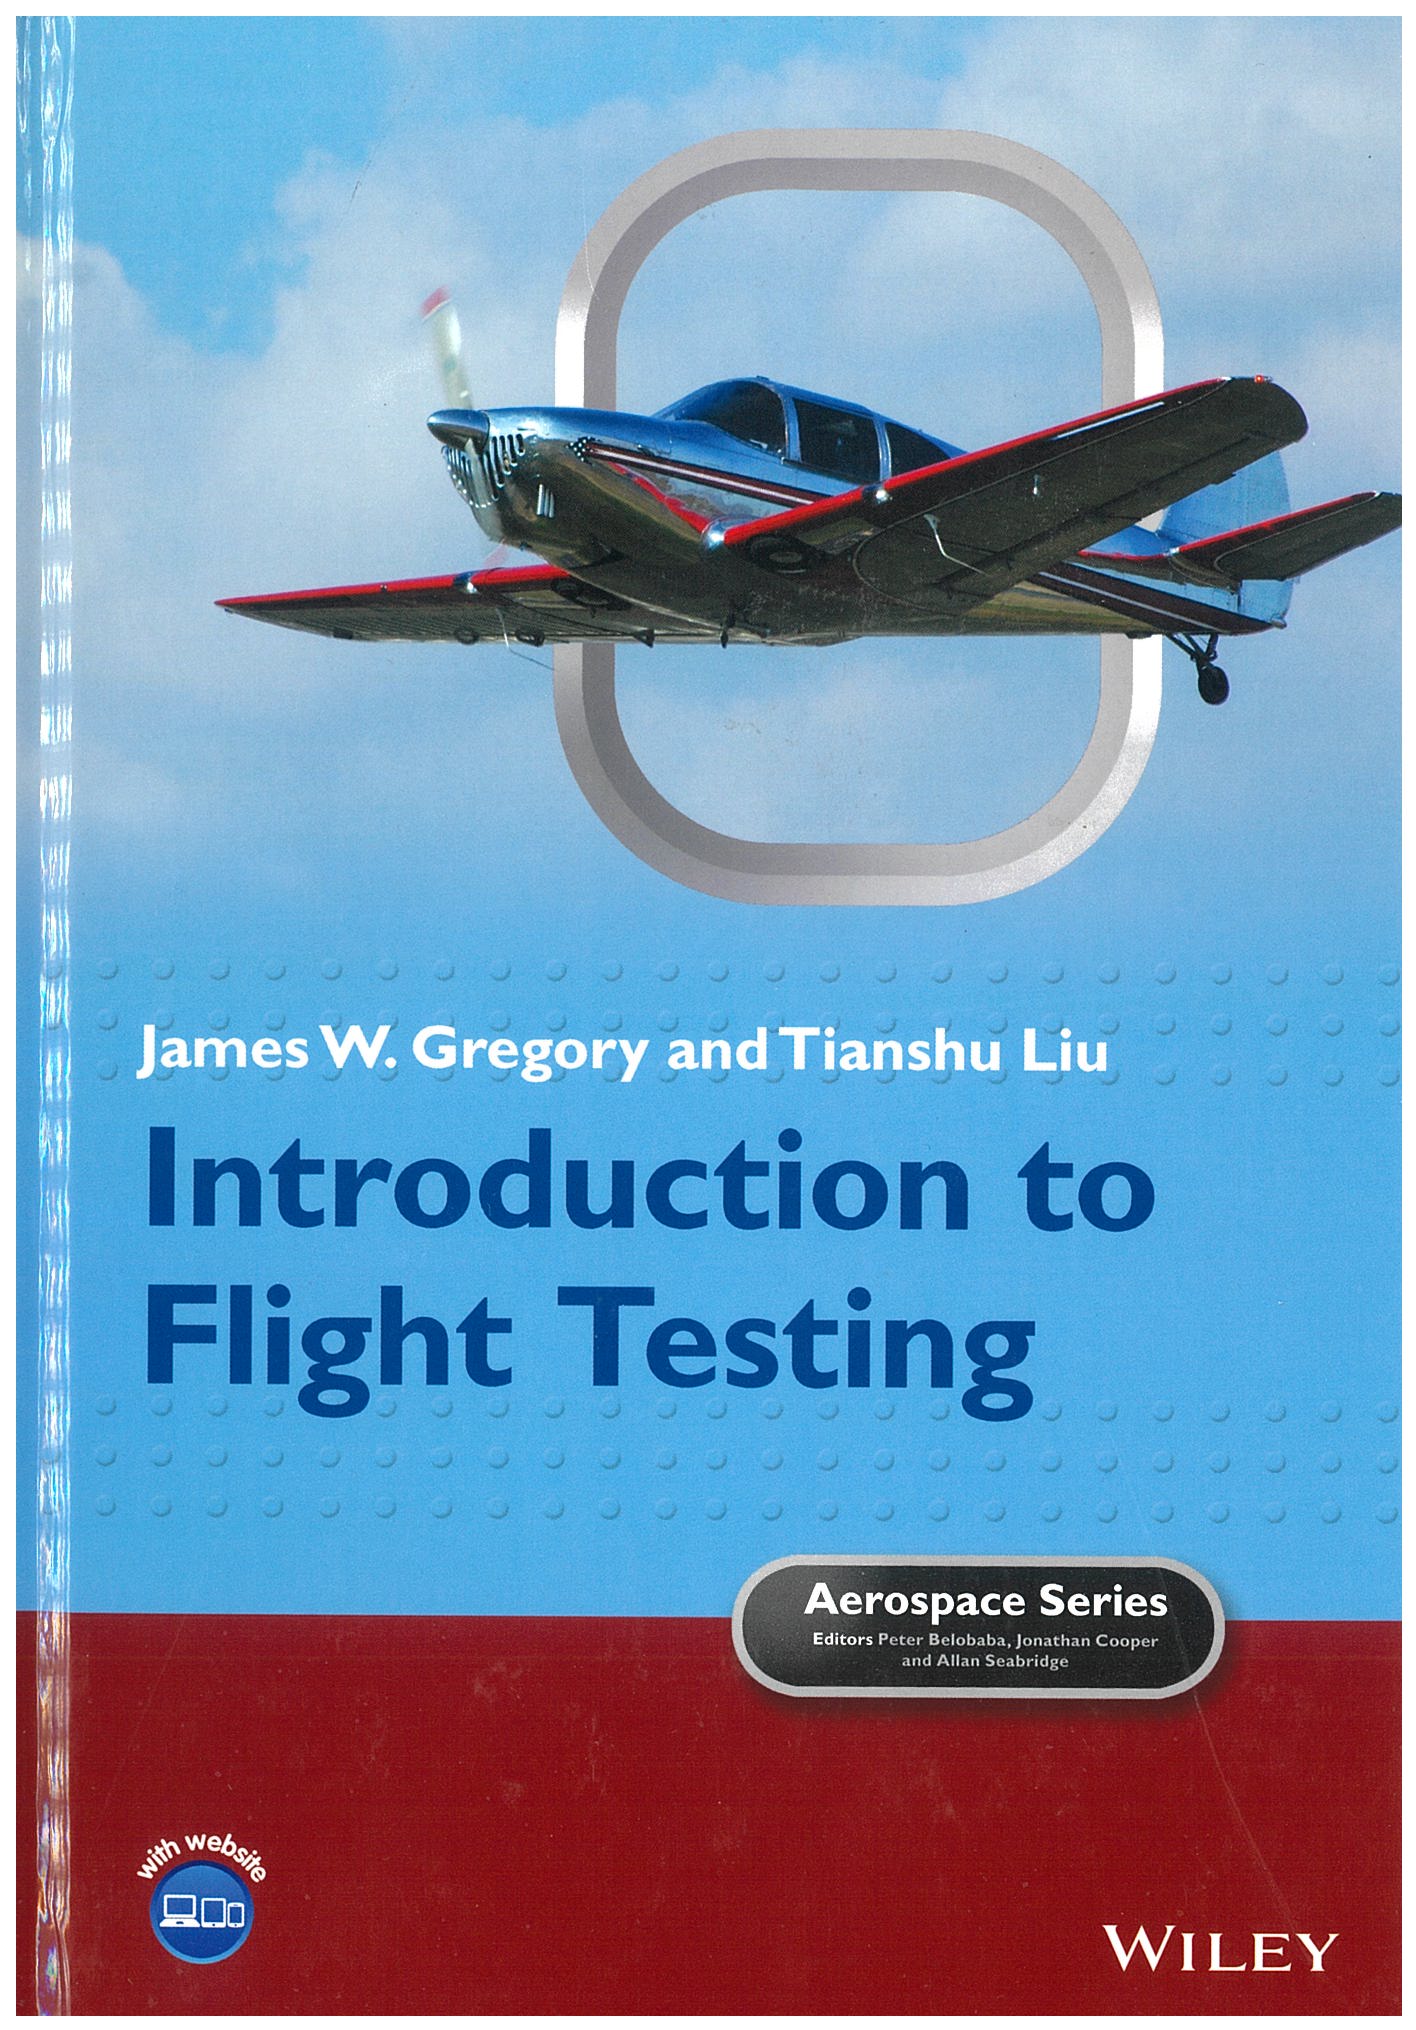 Introduction to Flight Testing